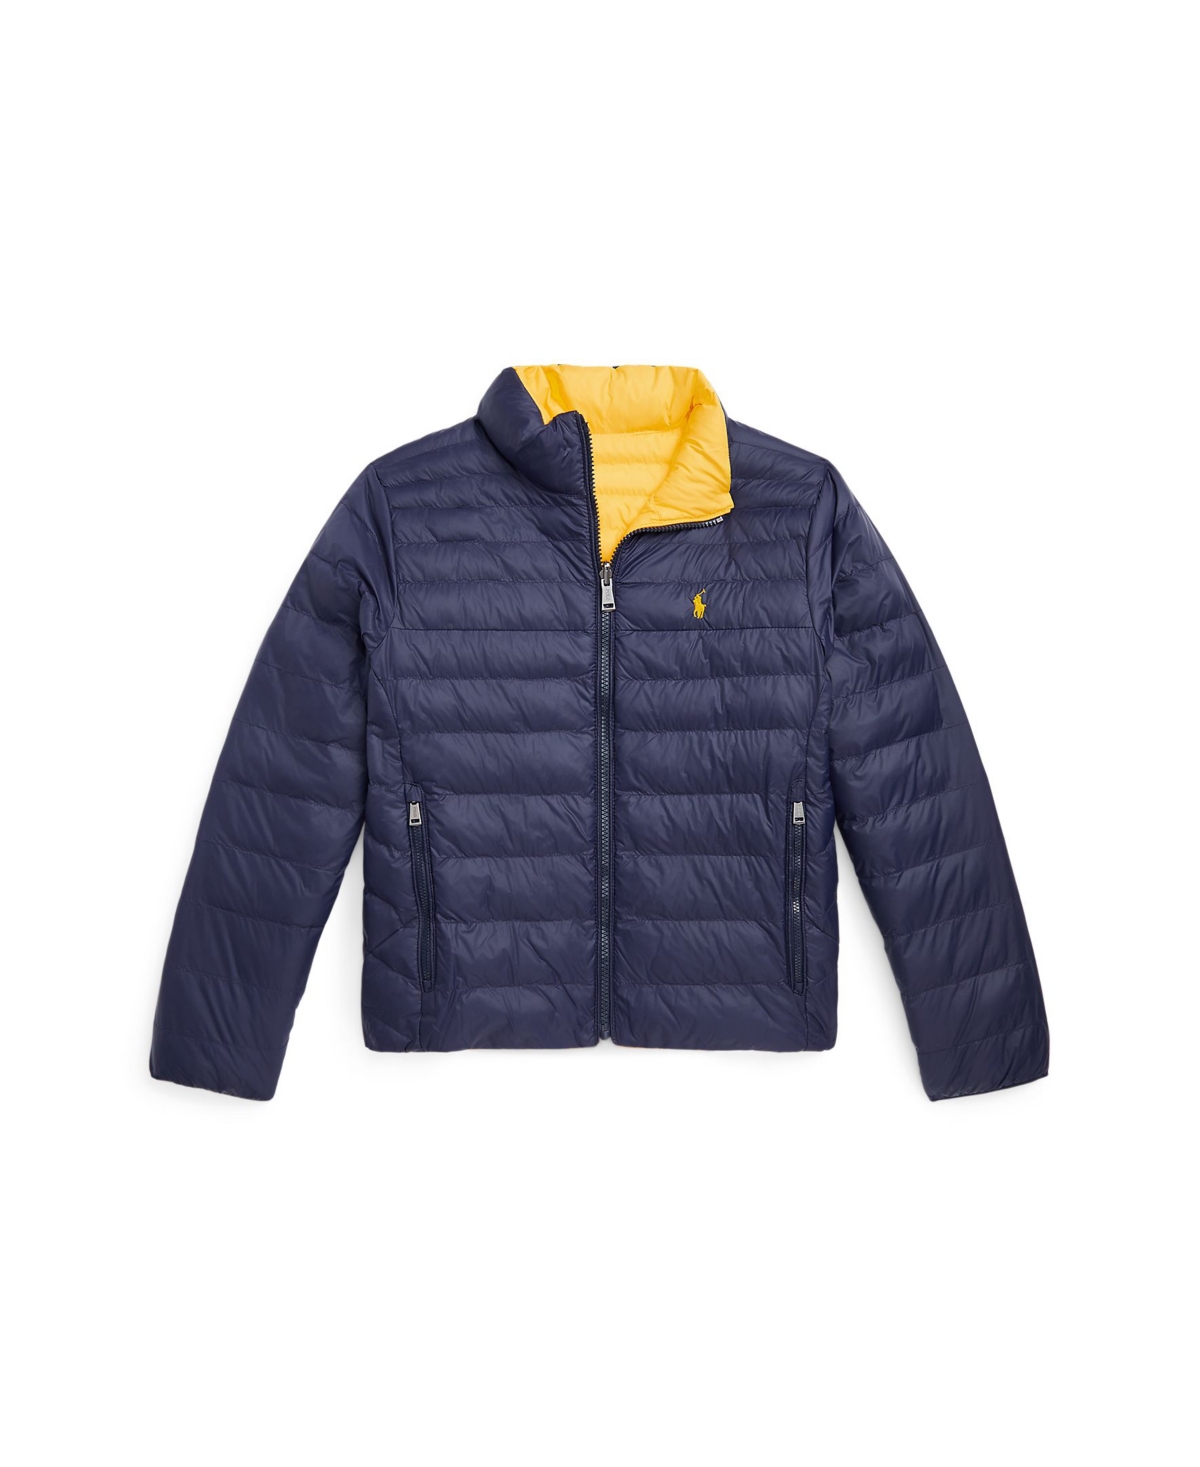 Polo Ralph Lauren Kids' Toddler And Little Unisex P-layer 2 Reversible Jacket In Newport Navy,yellow Finish